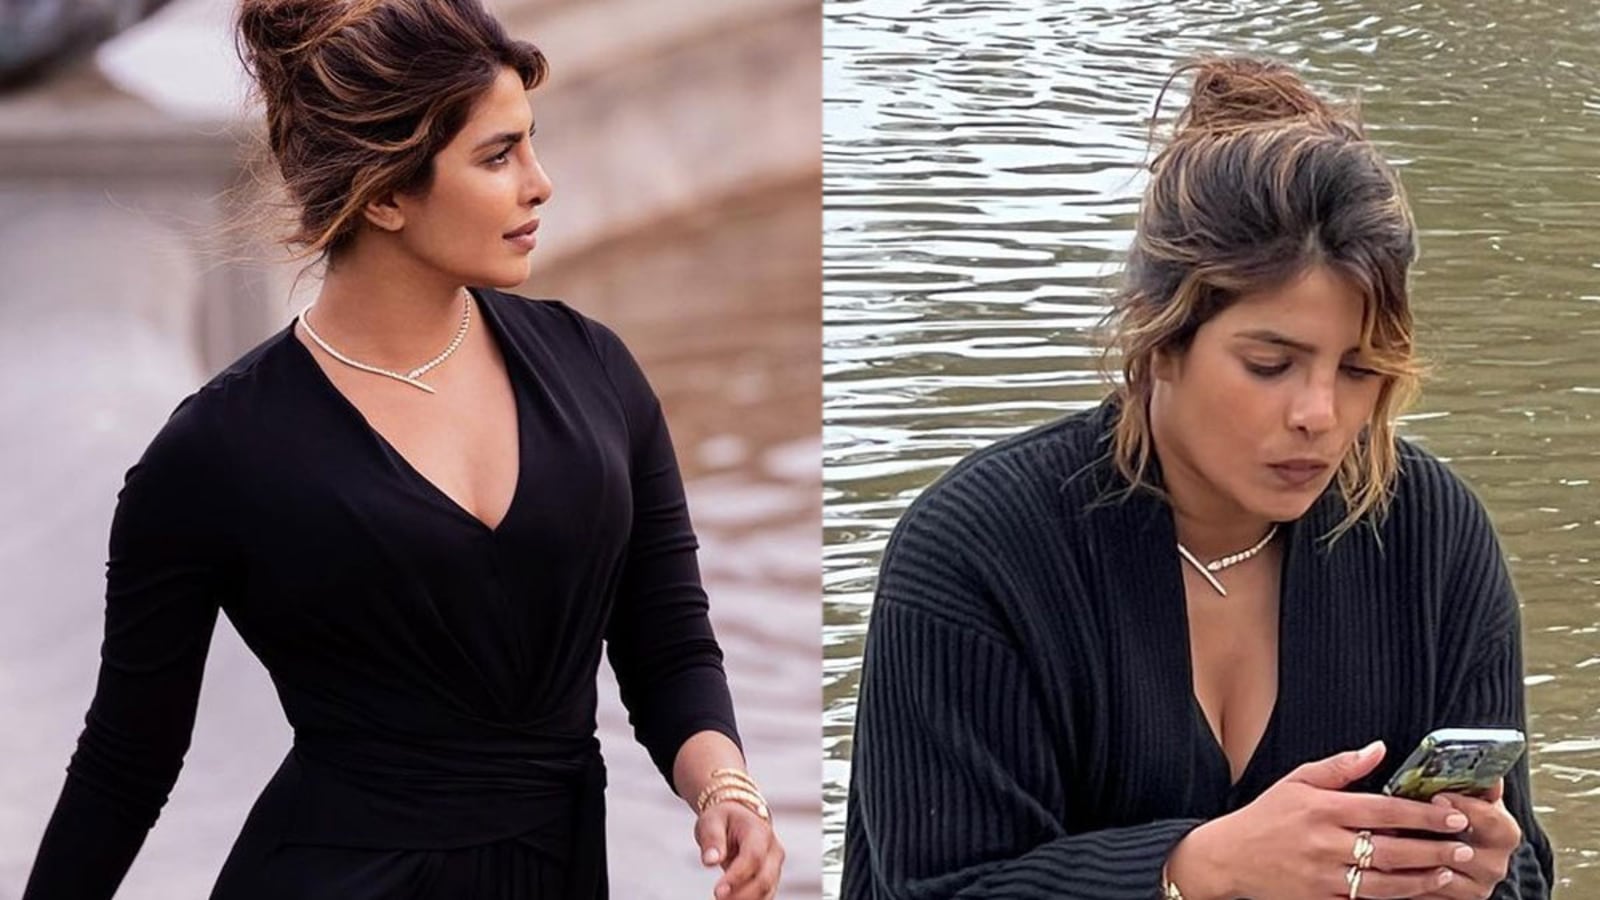 Priyanka dons black for photo shoot in Rome, takes a break to check her phone - Hindustan Times